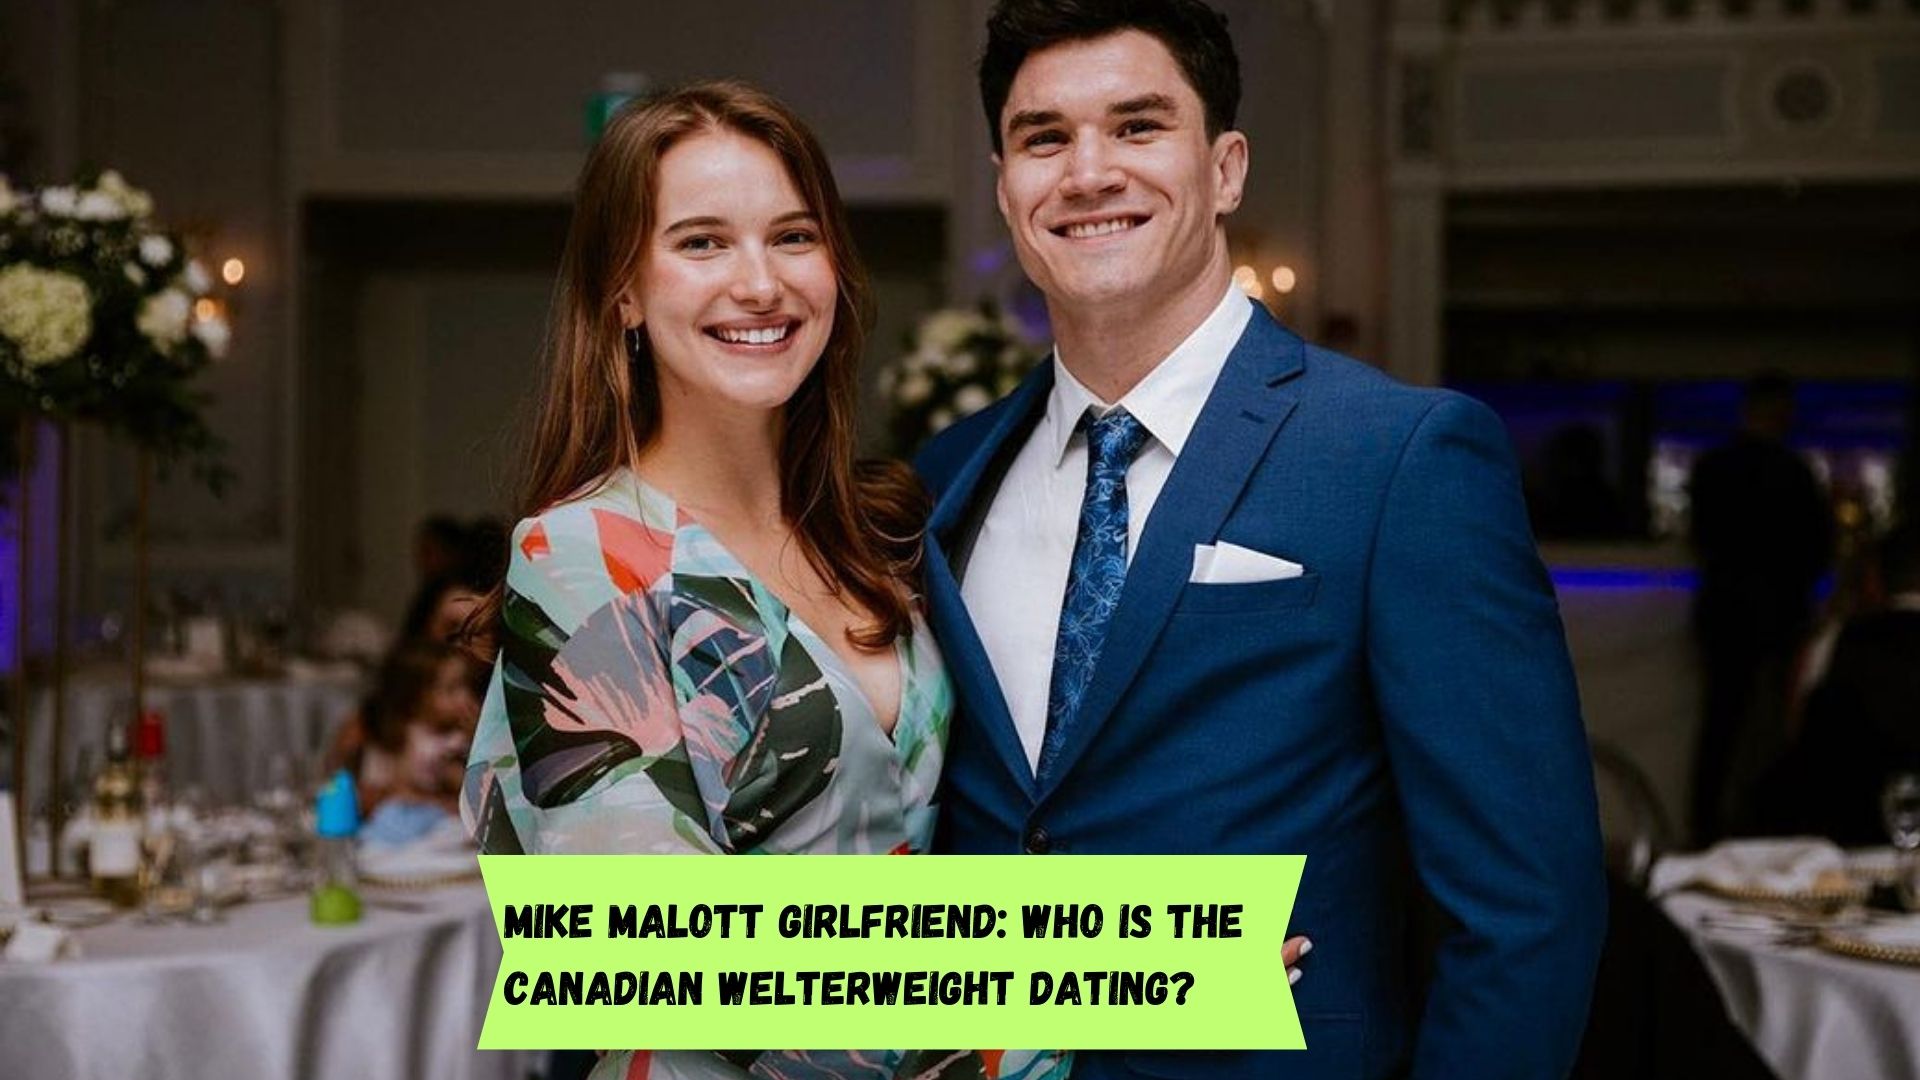 Mike Malott girlfriend: Who is the Canadian welterweight dating?